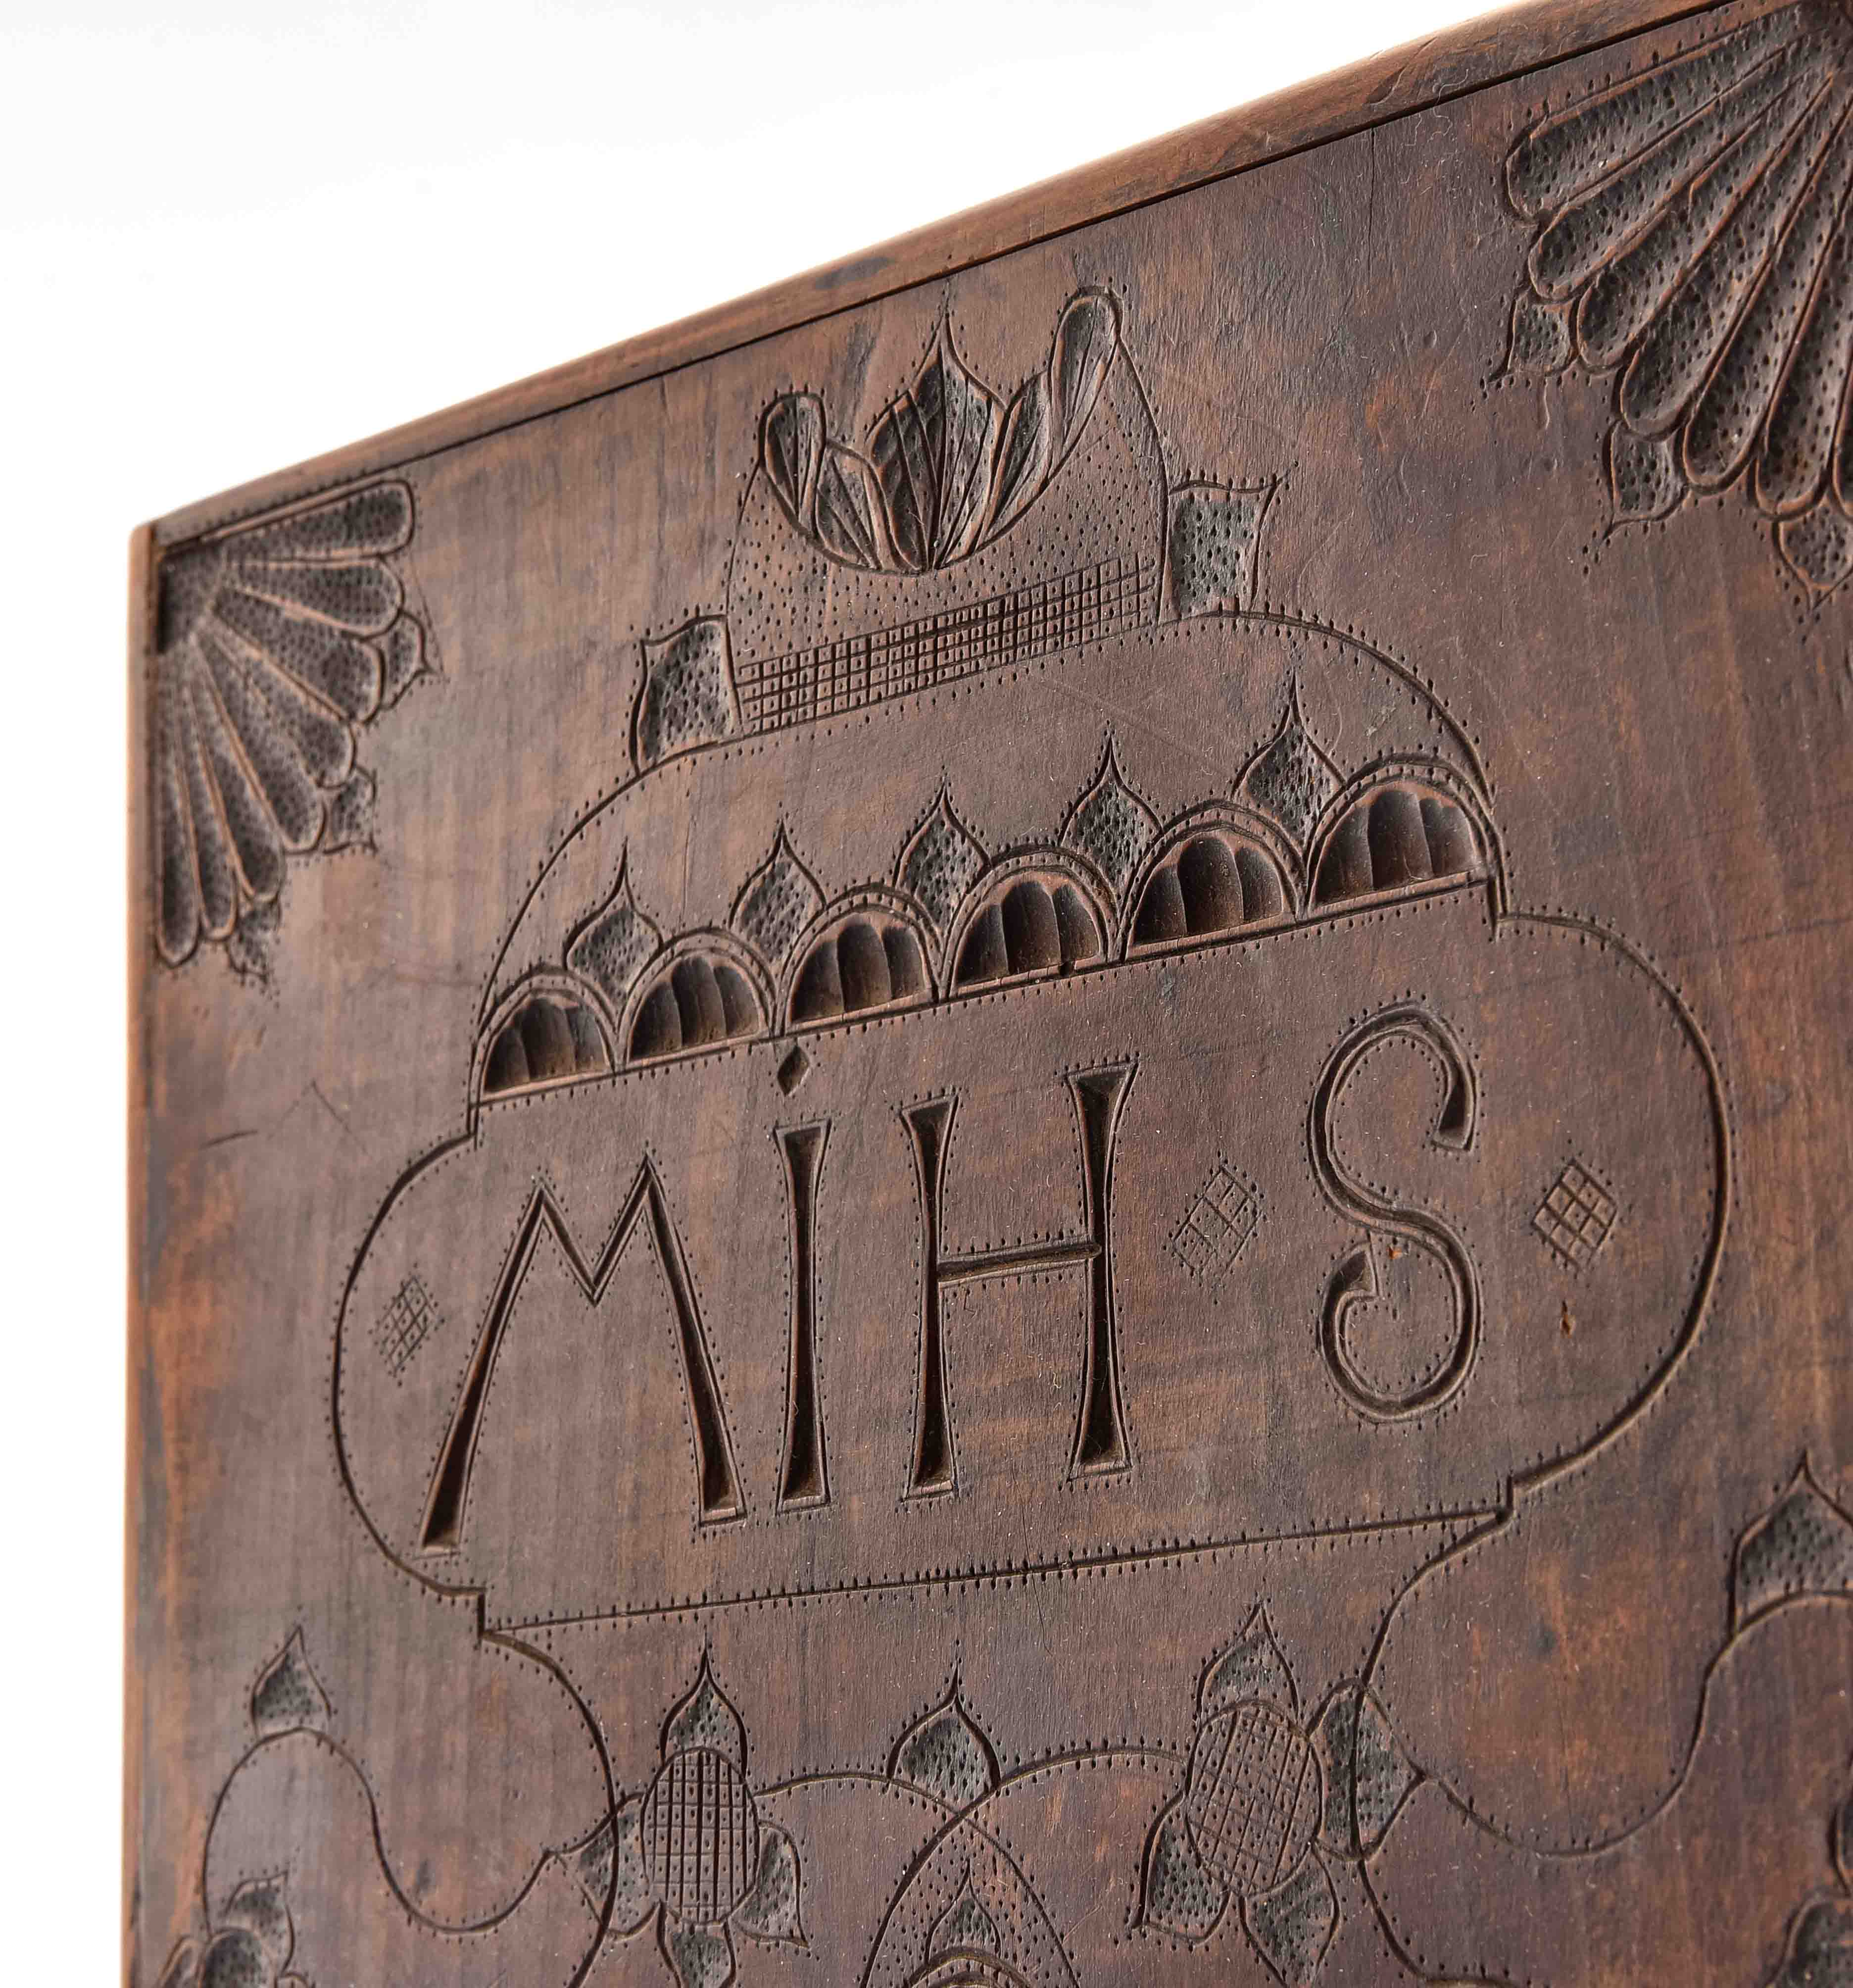 Volume - Book case, probably Swiss, dated 1790. With monogram 'MIH S'. Cherry wood. Front cover orn - Image 5 of 9